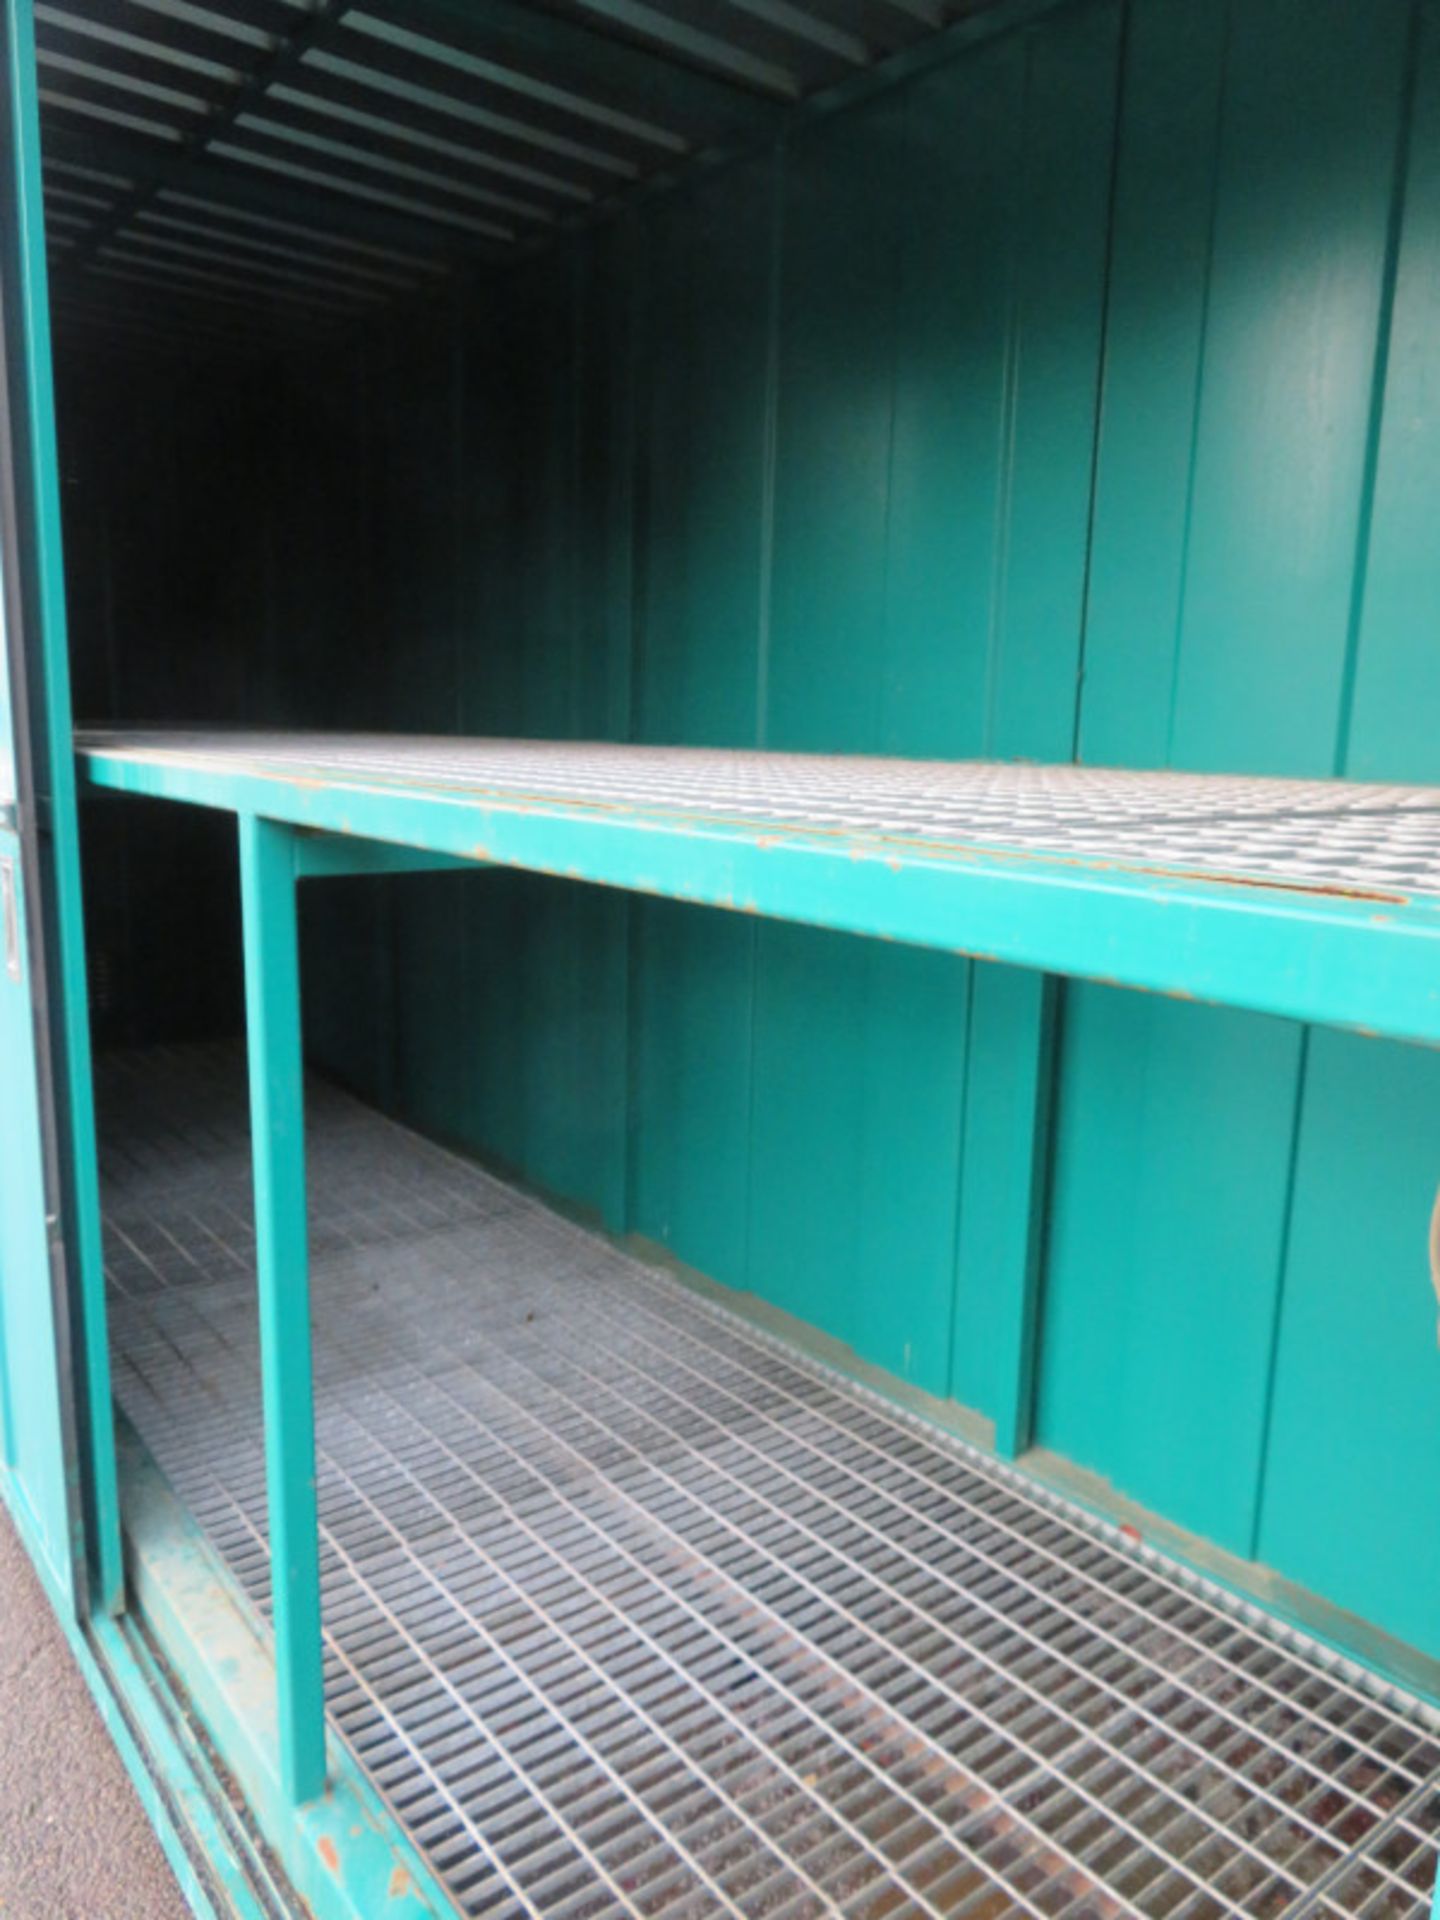 2 Tier bunded chemical storage container with 4 sliding doors - 600ft x 165 x 320cm Extern - Image 6 of 7